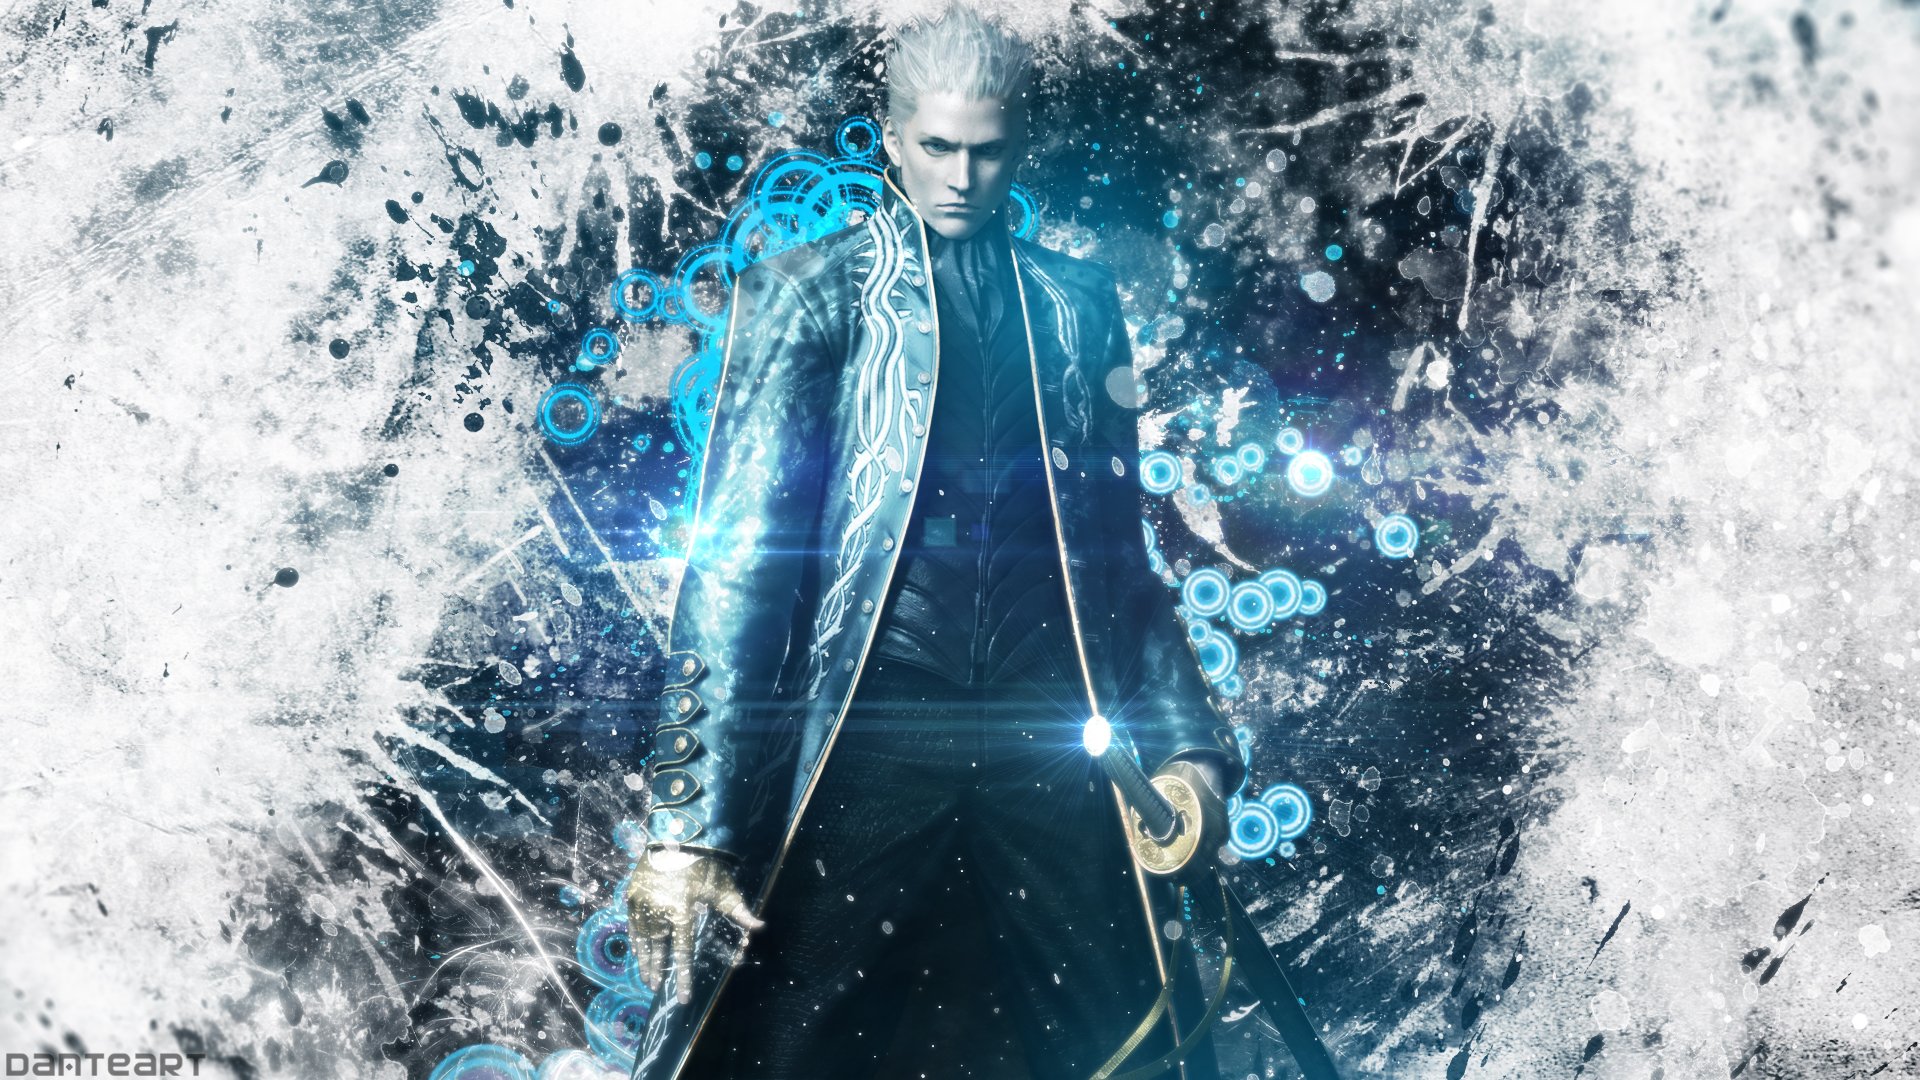 Devil May Cry 3 Vergil Wallpaper by DanteArtWallpapers 1920x1080